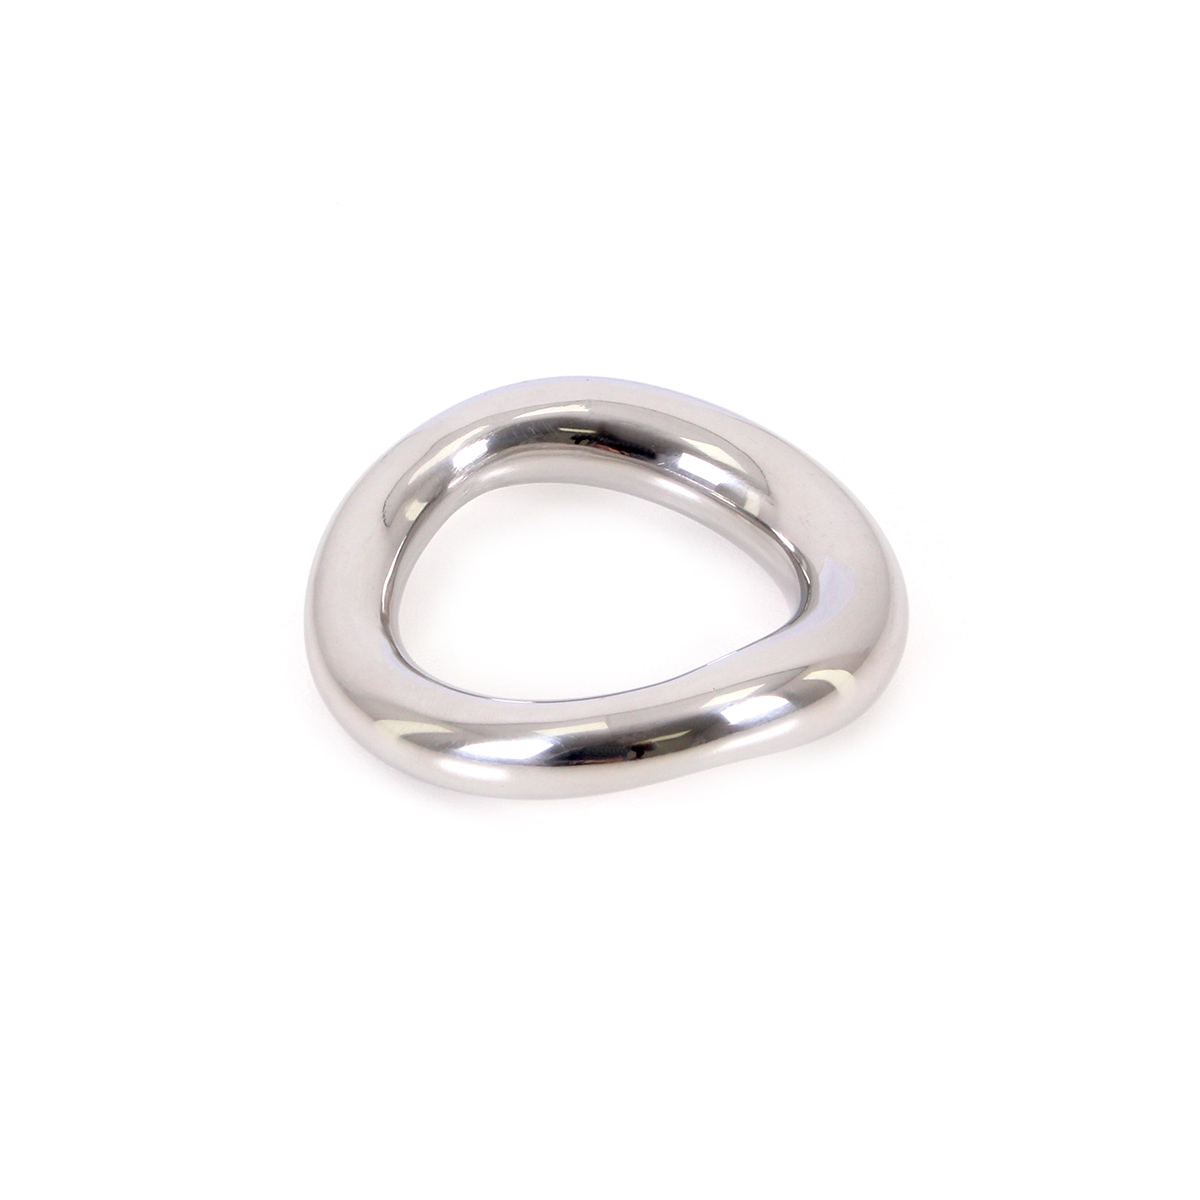 Costum-Fit-Cockring-40-mm-OPR-277044-3